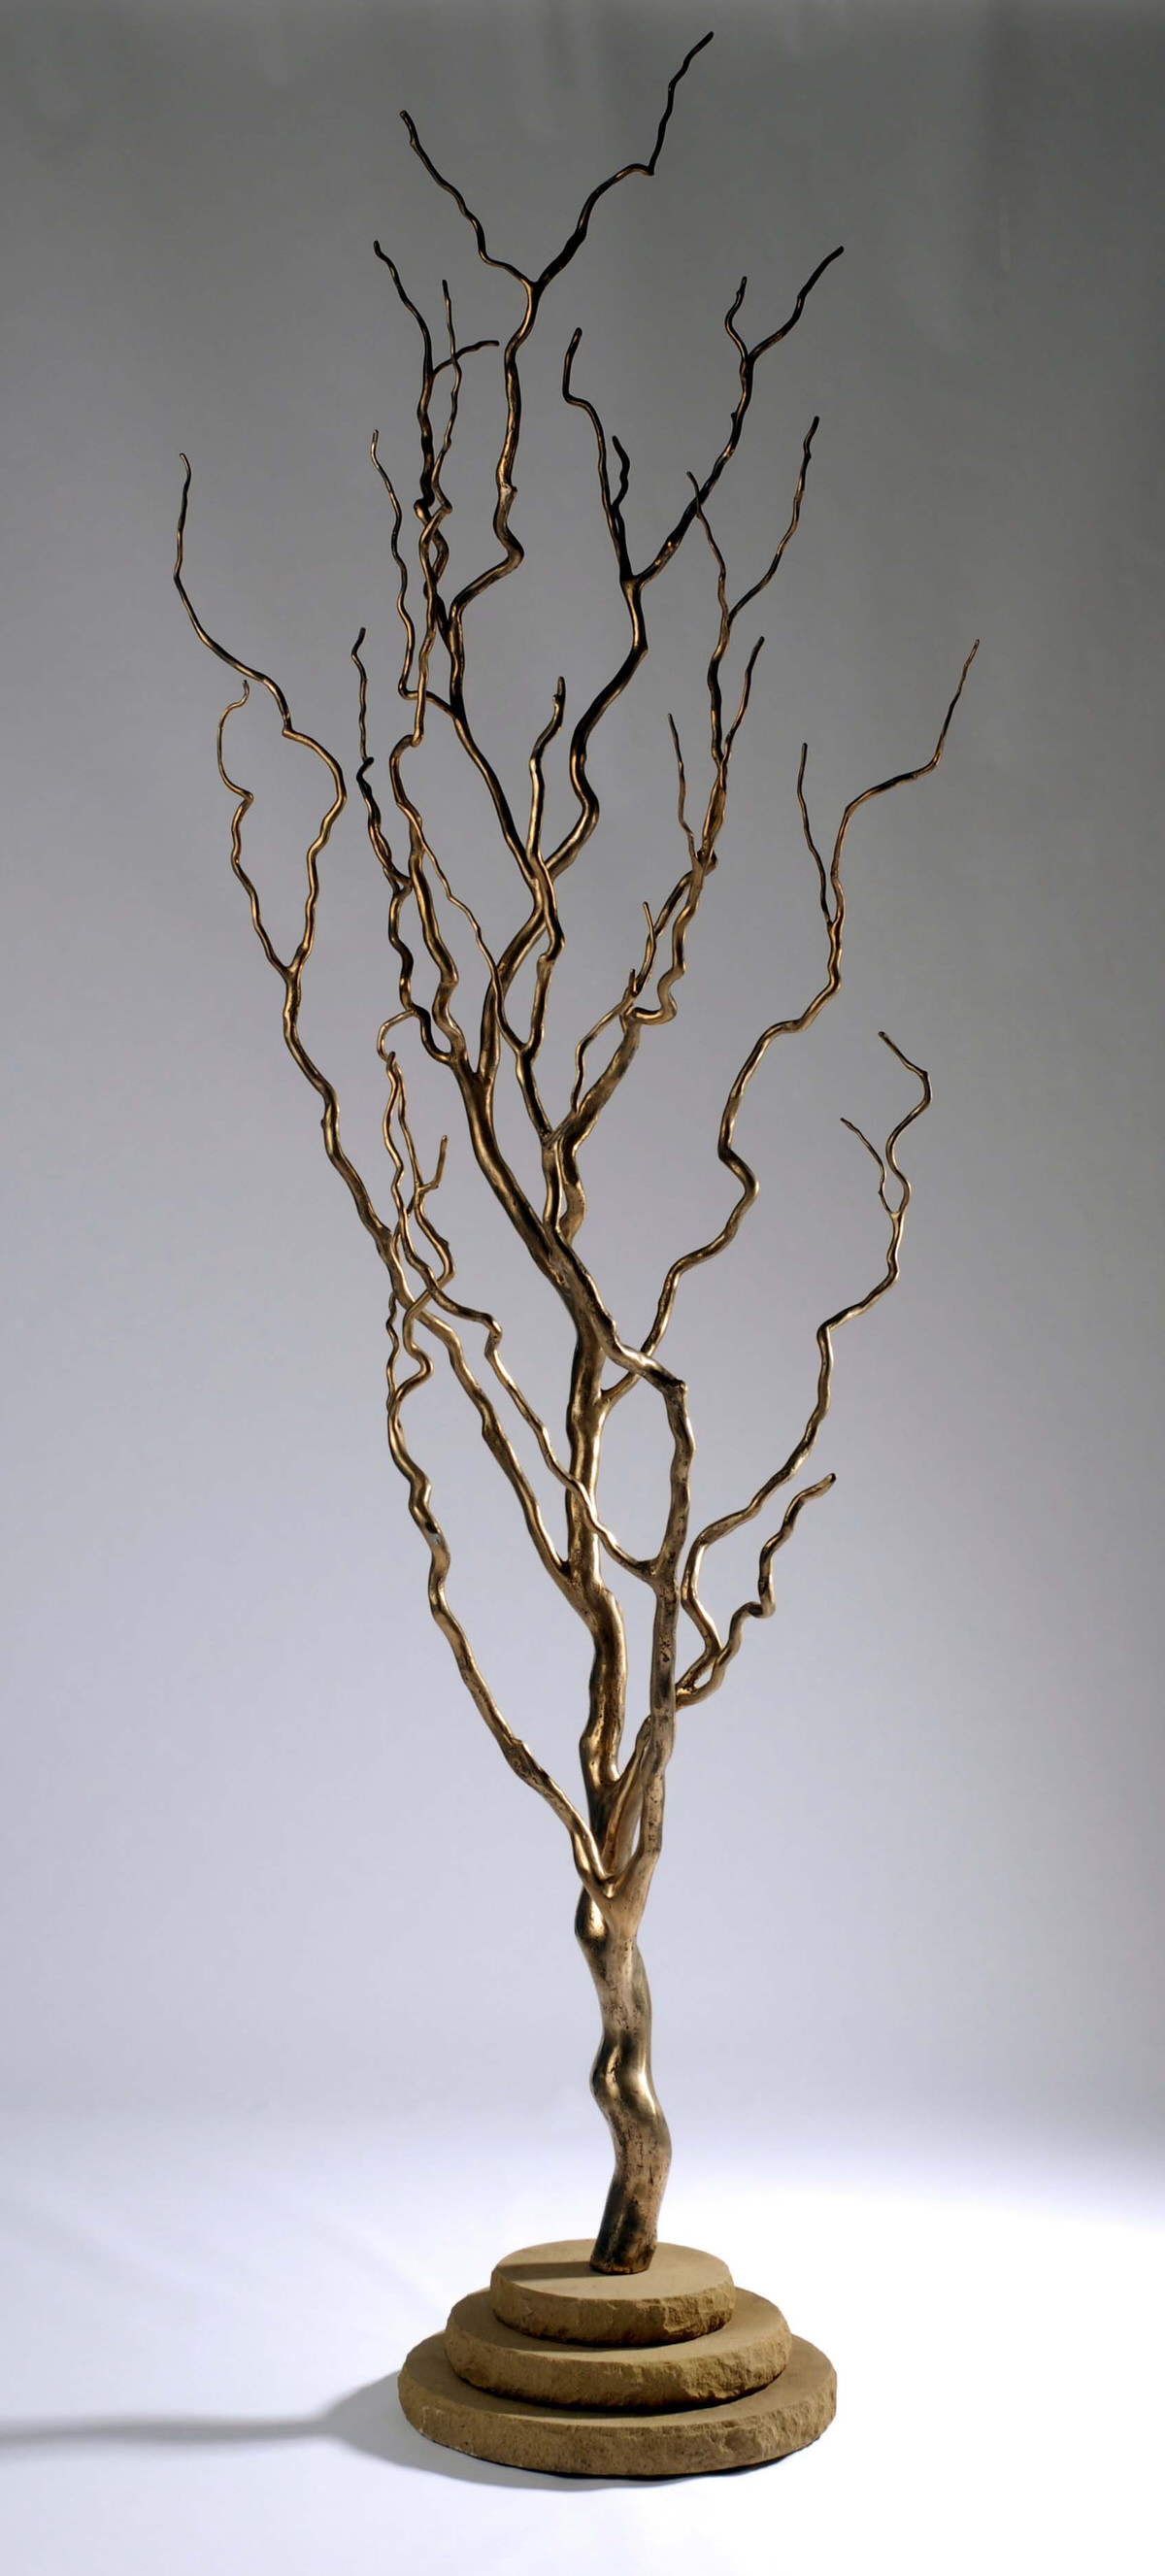 Willow Tree Sculpture bronze public commission hospital commission bespoke sculpture memorial tree wishing tree trees art by Mark Reed